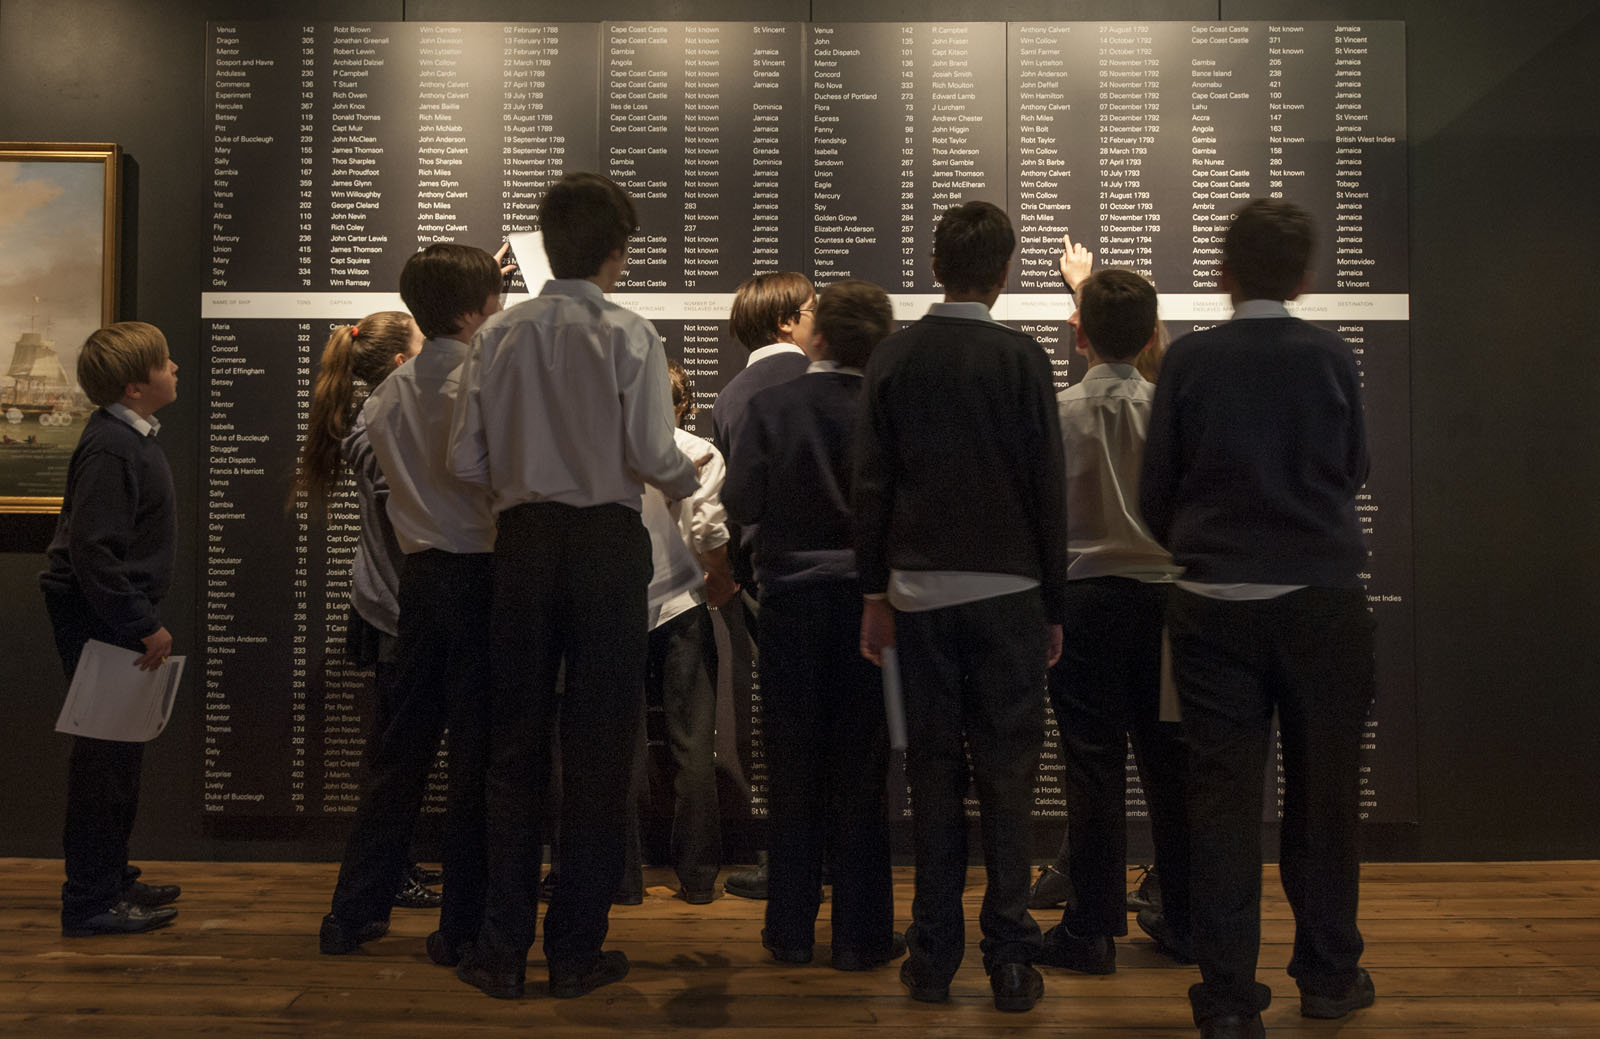 Young visitors to the Museum of London Docklands view the names of slave ships that sailed from London.